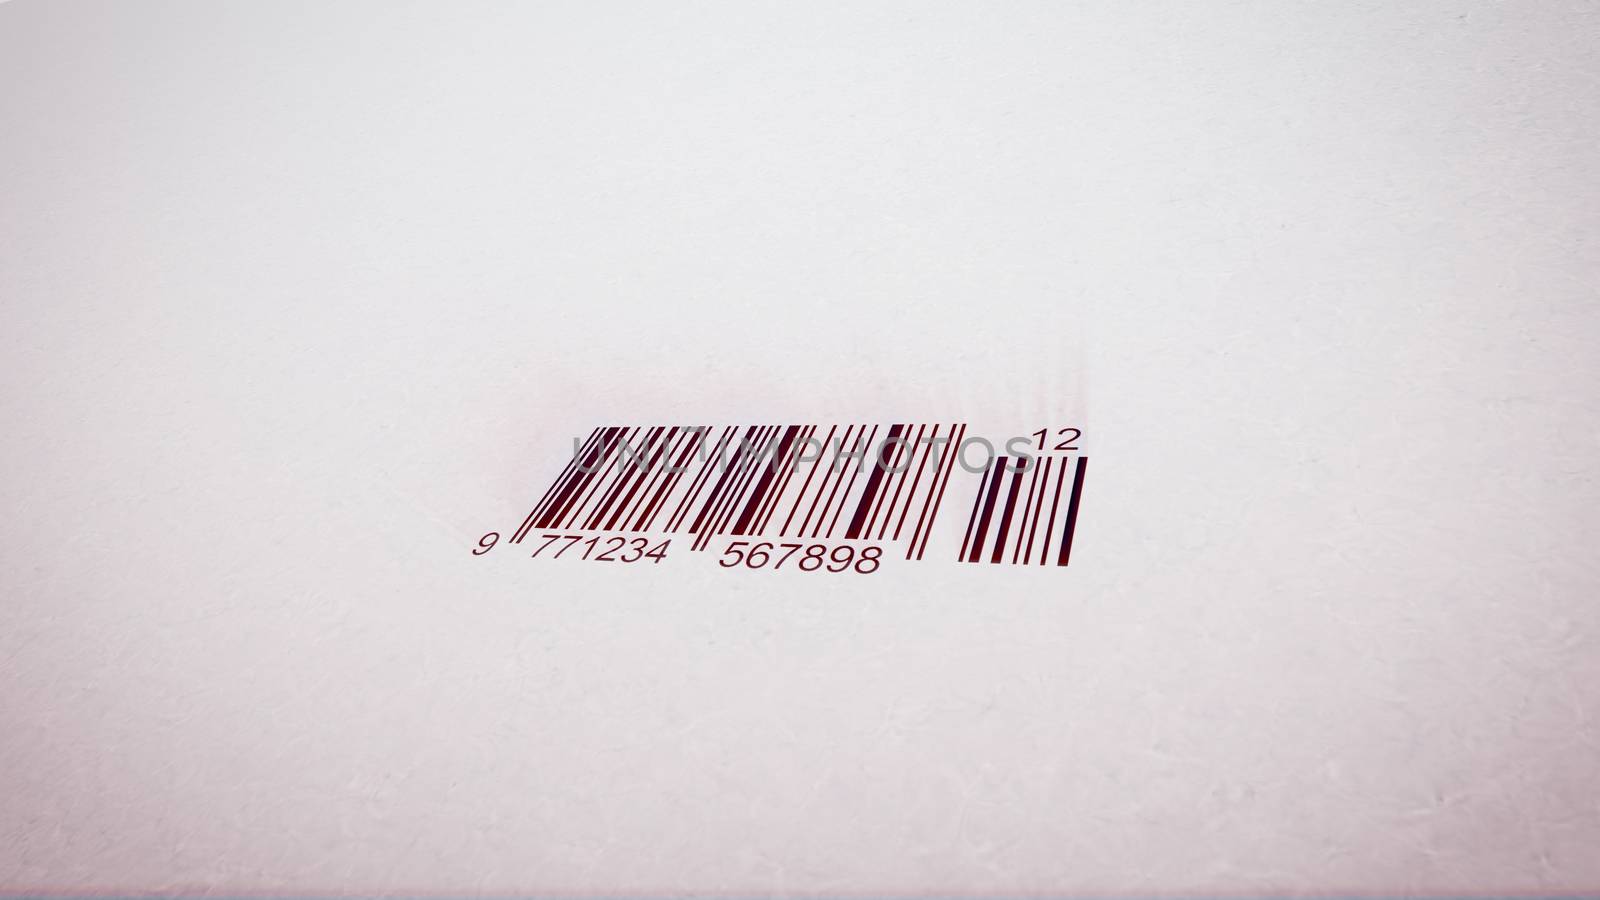 Artistic 3d rendering of an abstract Barcode scanner placed diagonally. The black and white code is placed in the white backdrop. It looks simple but impressive